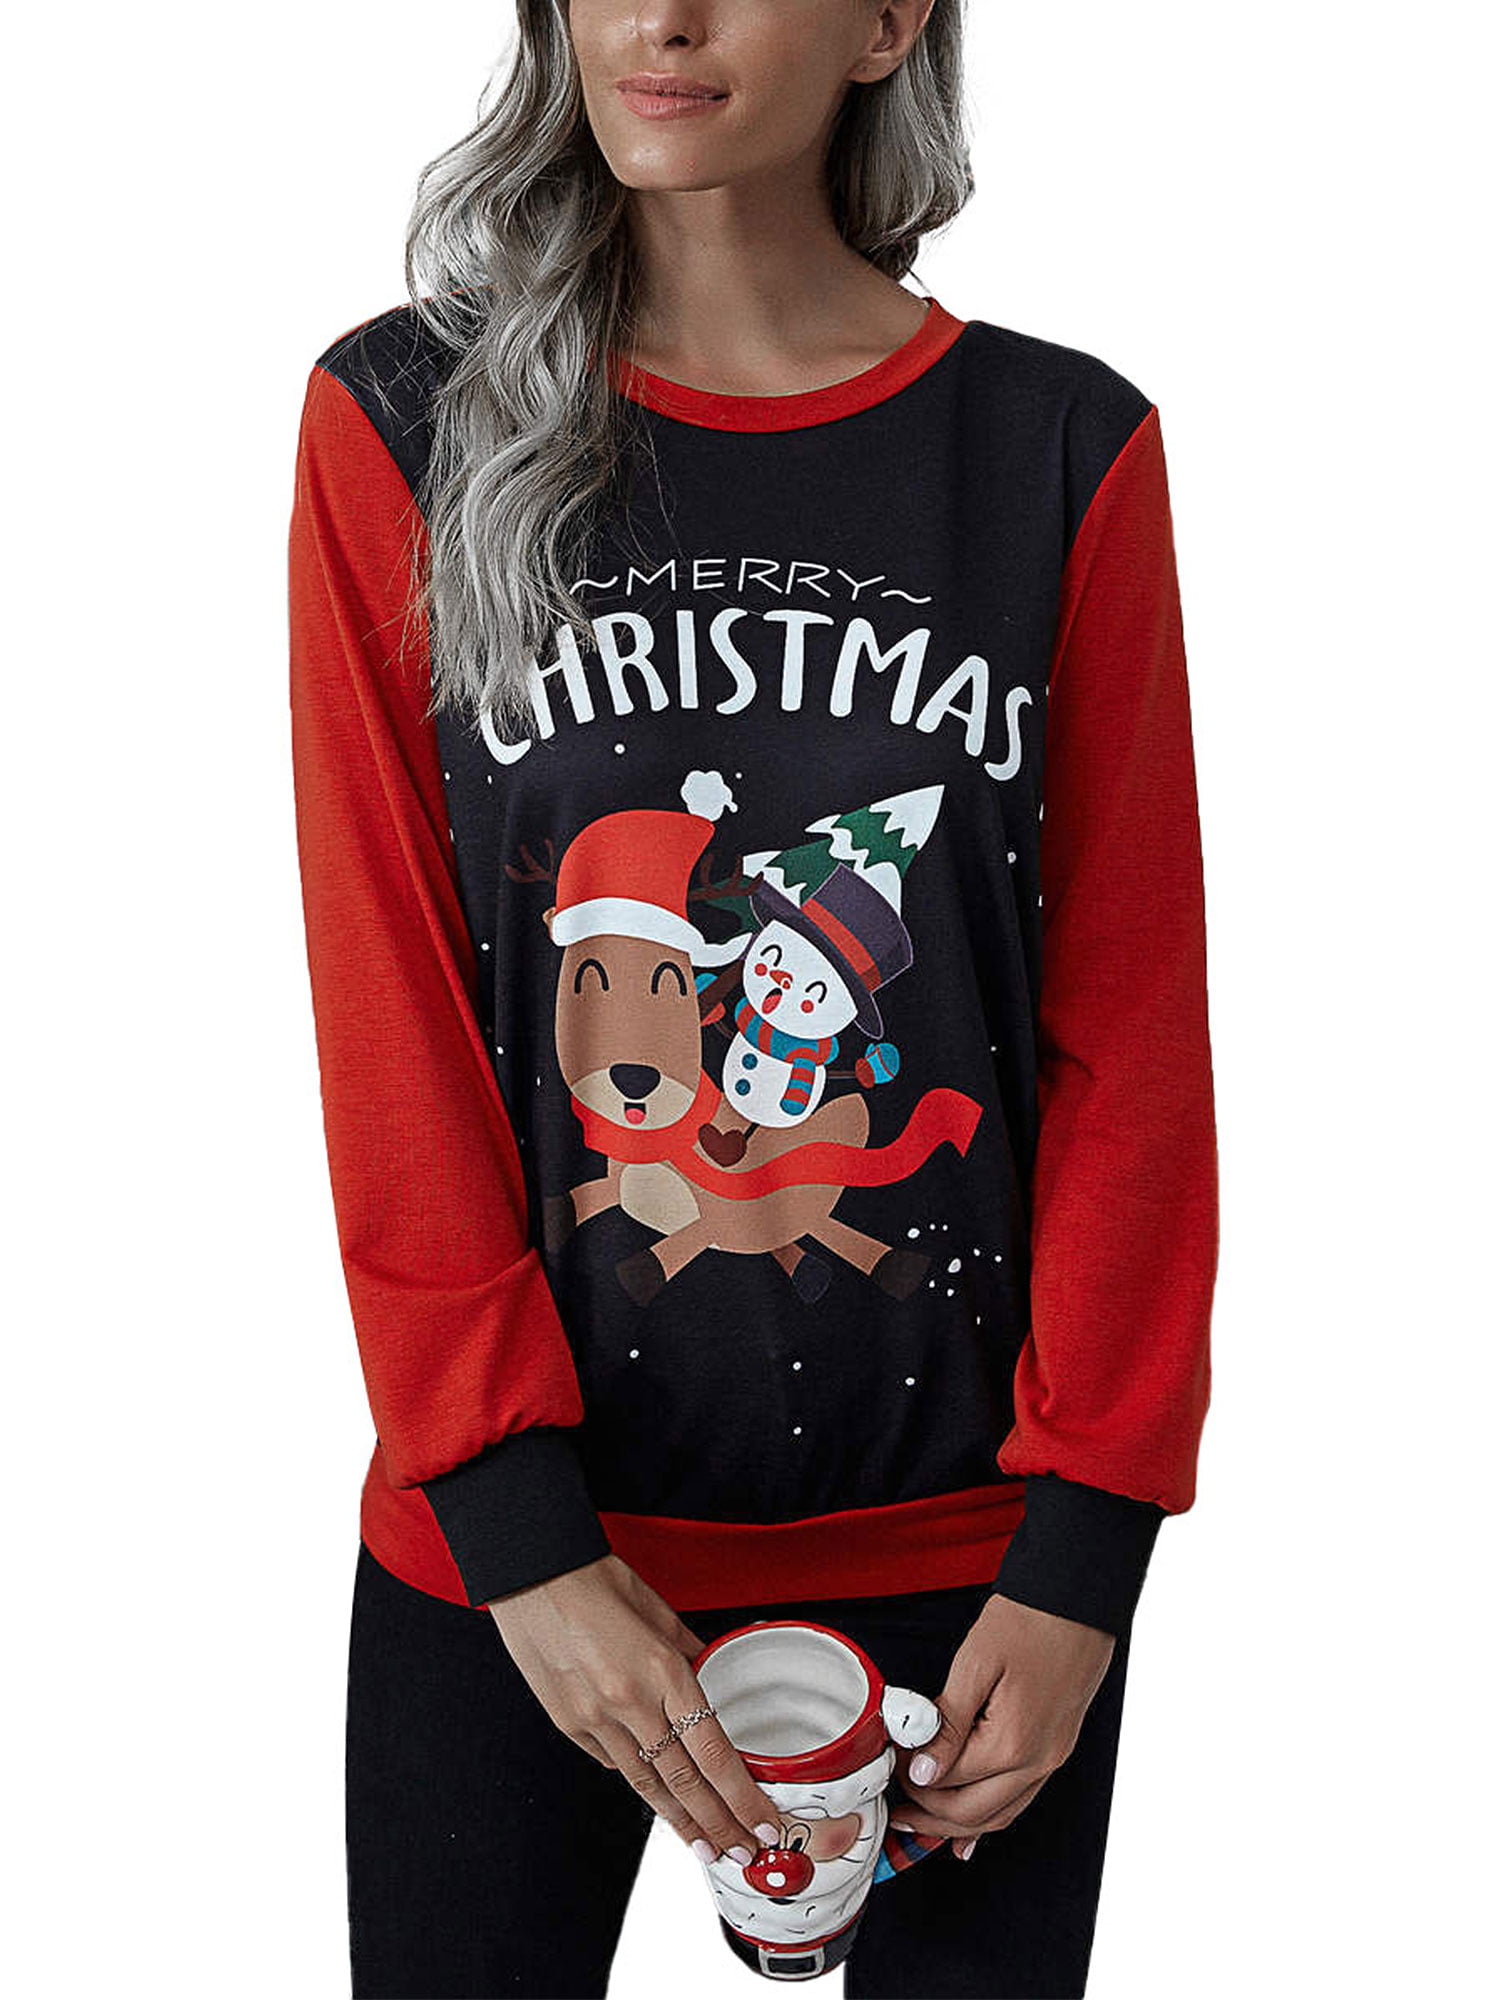 Christmas Shirts for Women Color Block Splicing Long Sleeve Crewneck Sweatshirts Casual Loose Plus Size Pullover Tops 